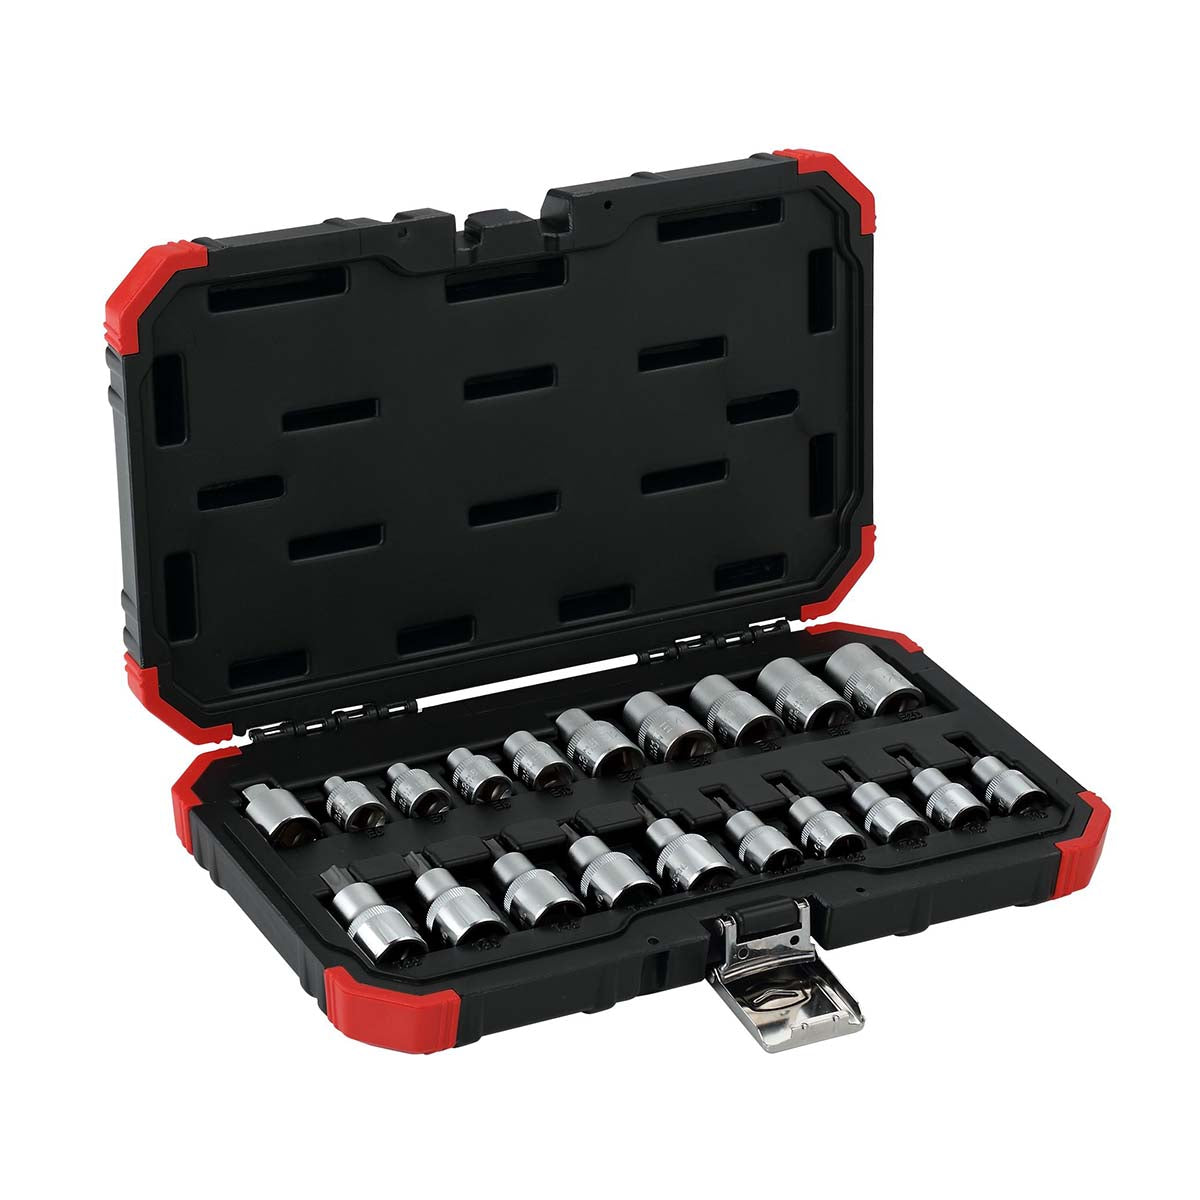 GEDORE red R68003020 - 1/2" TX socket wrench set, 20 pieces (3300045)